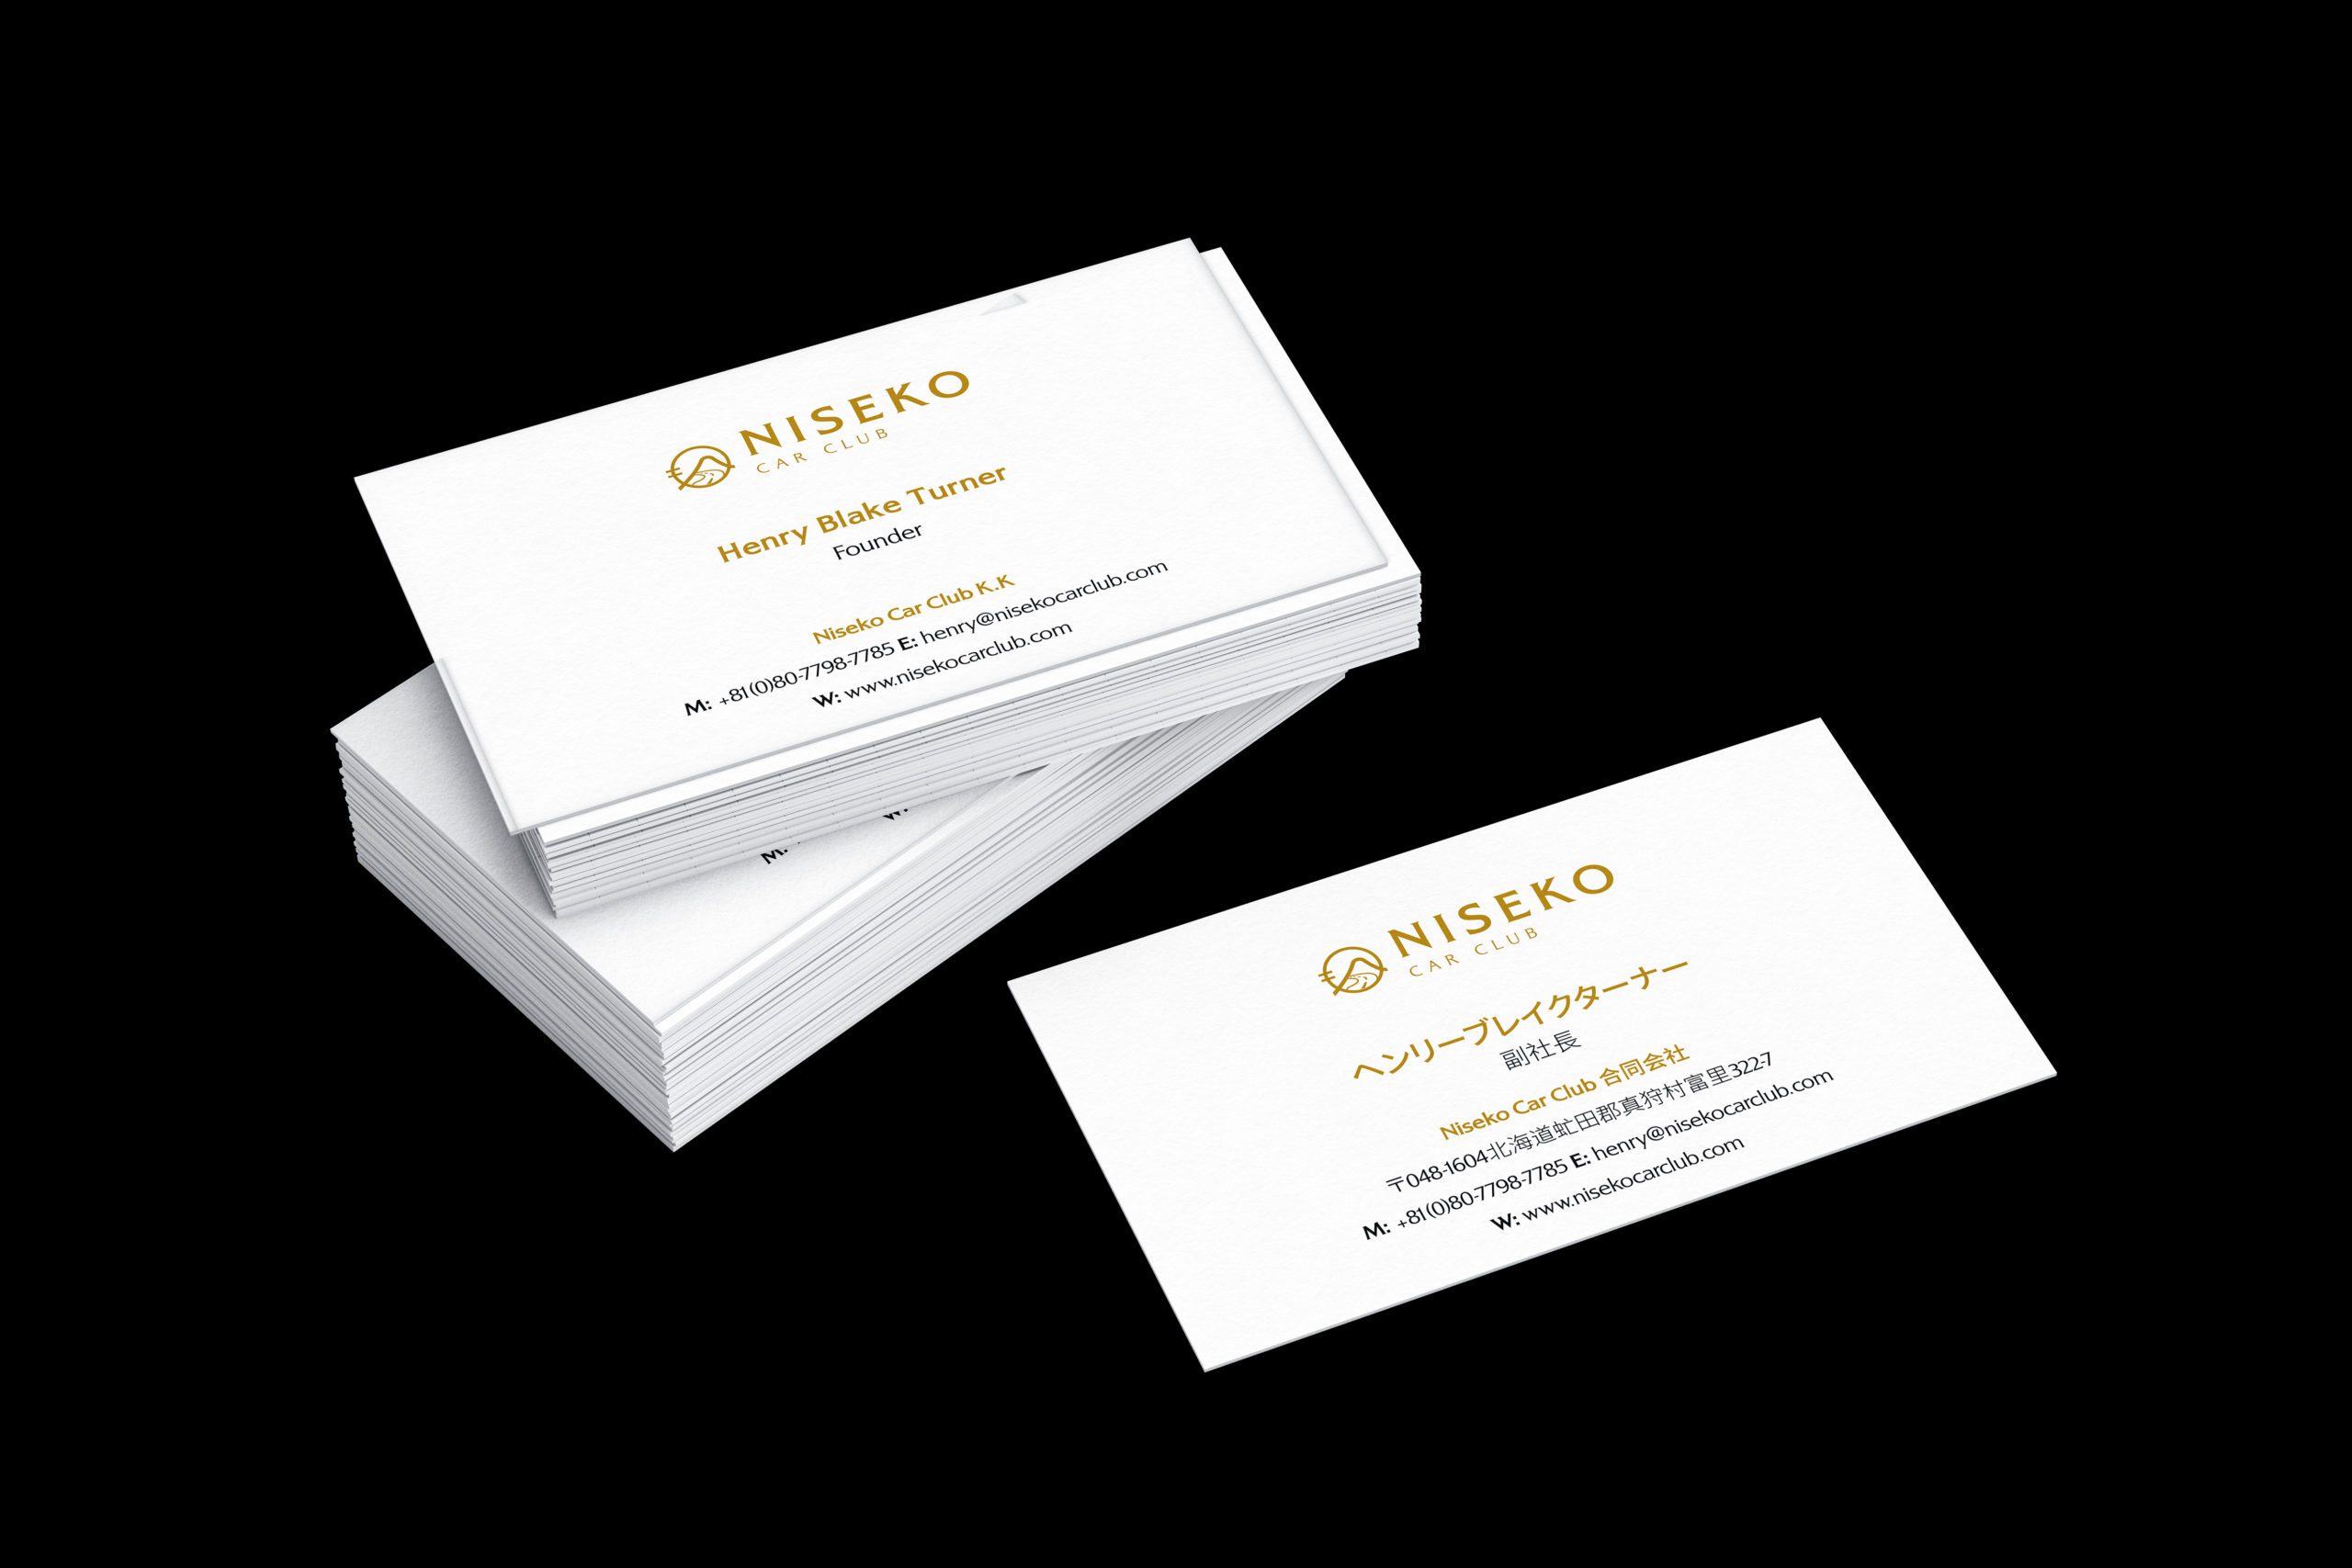 Niseko Business Cards scaled